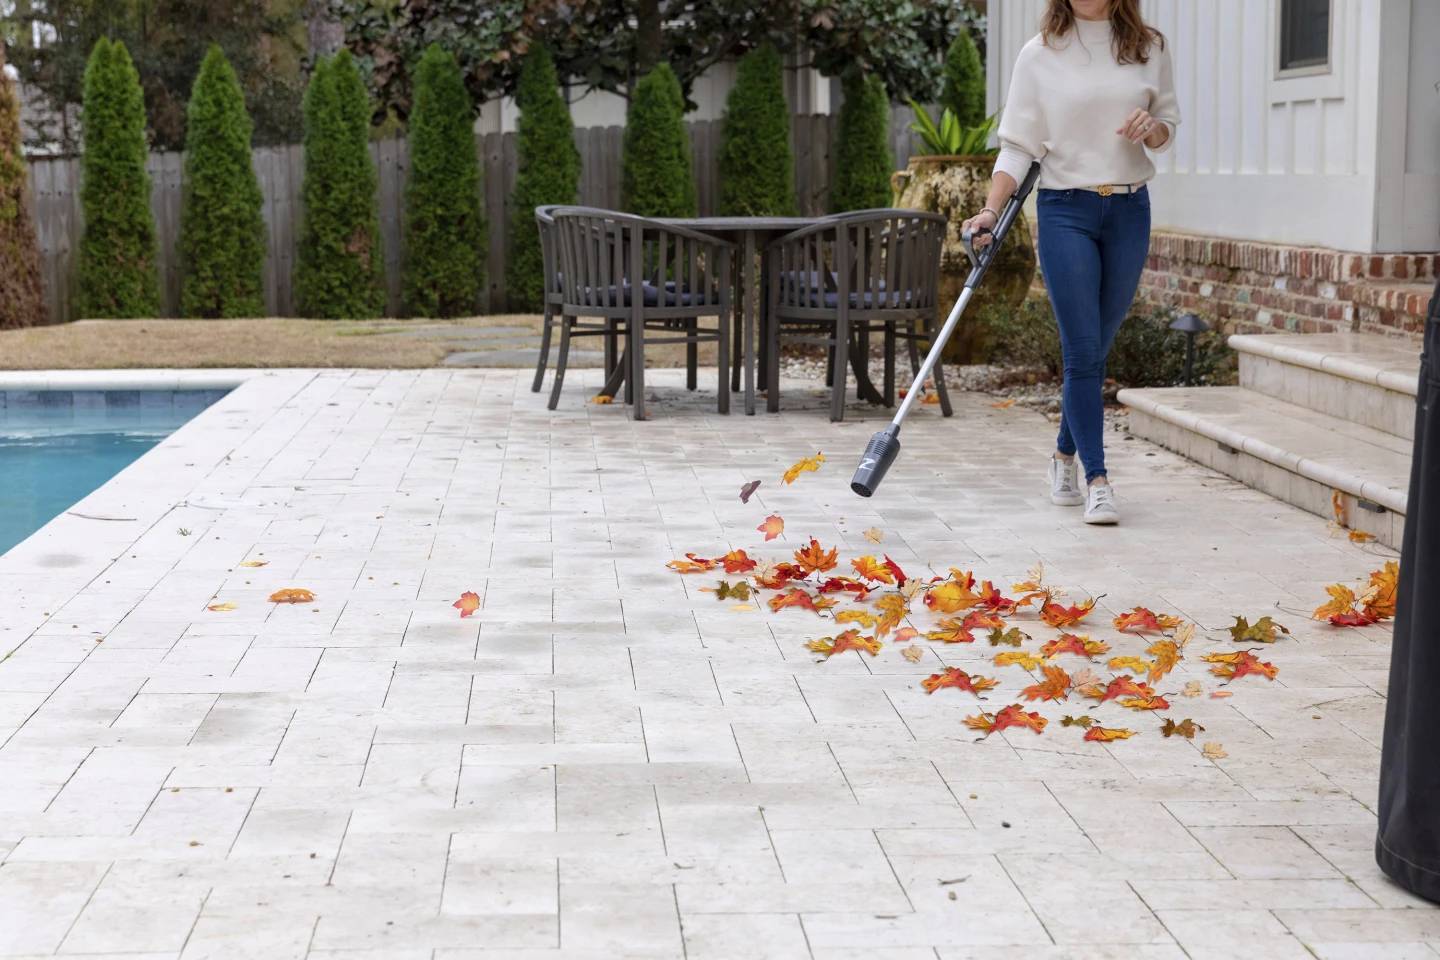 This image provided by ZoomBroom shows a lightweight, cordless ZoomBroom stick blower in use.